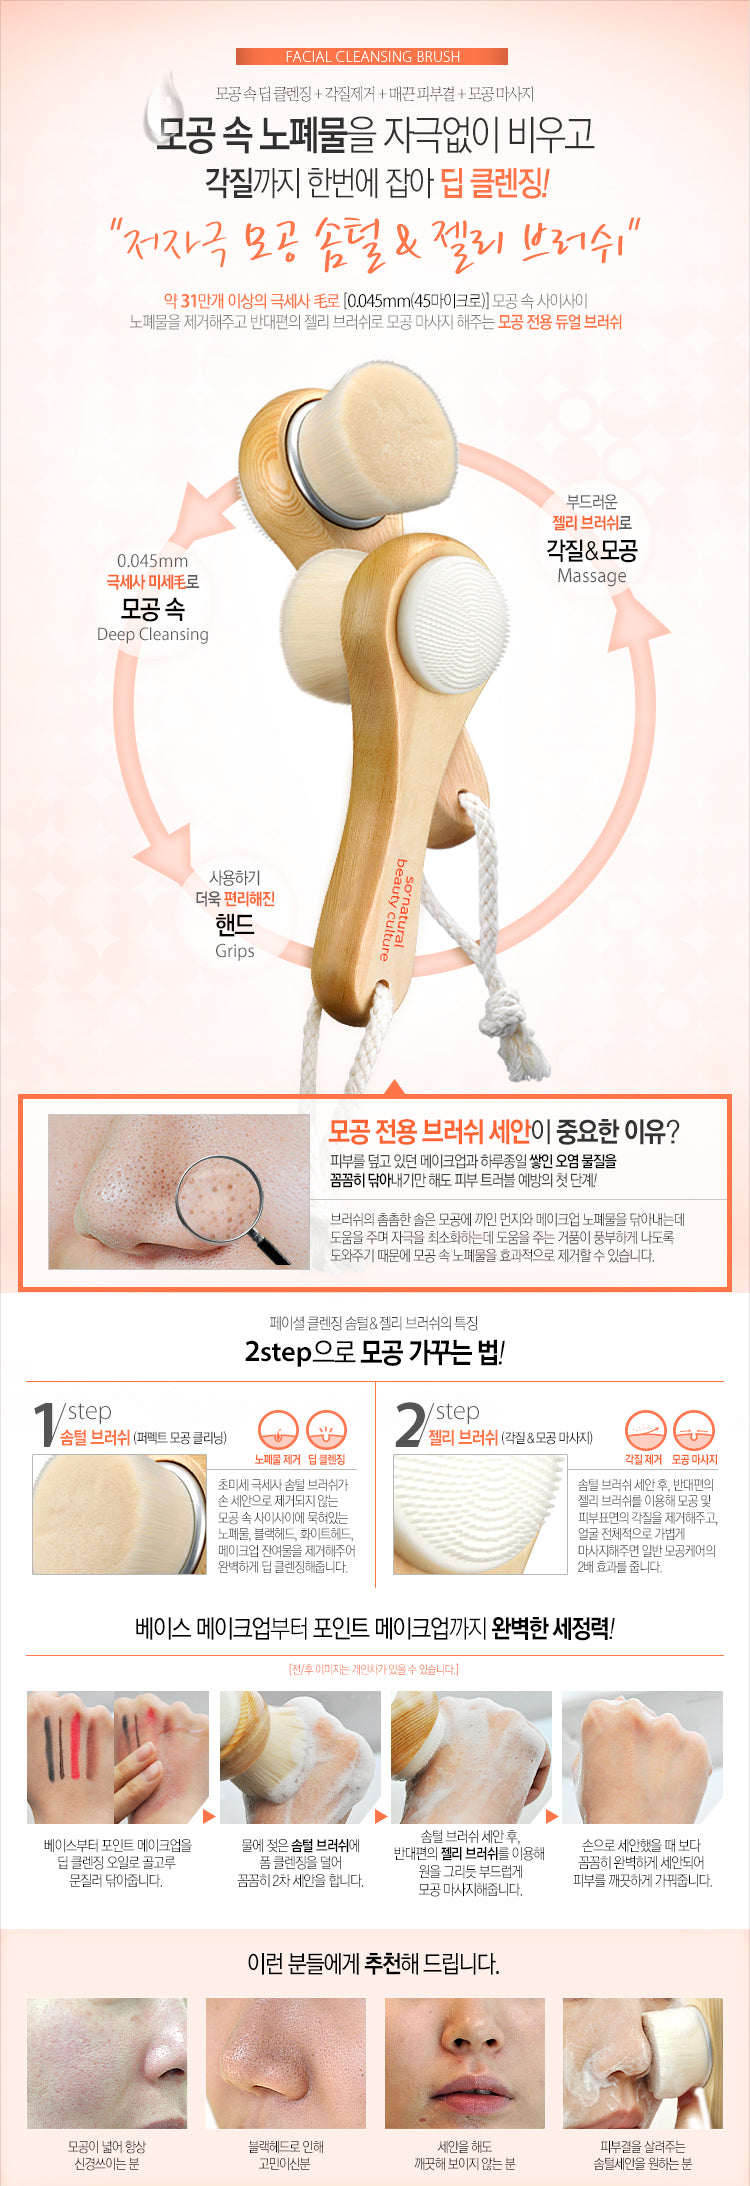 BEAUTY CULTURE FACIAL CLEANSING BRUSH